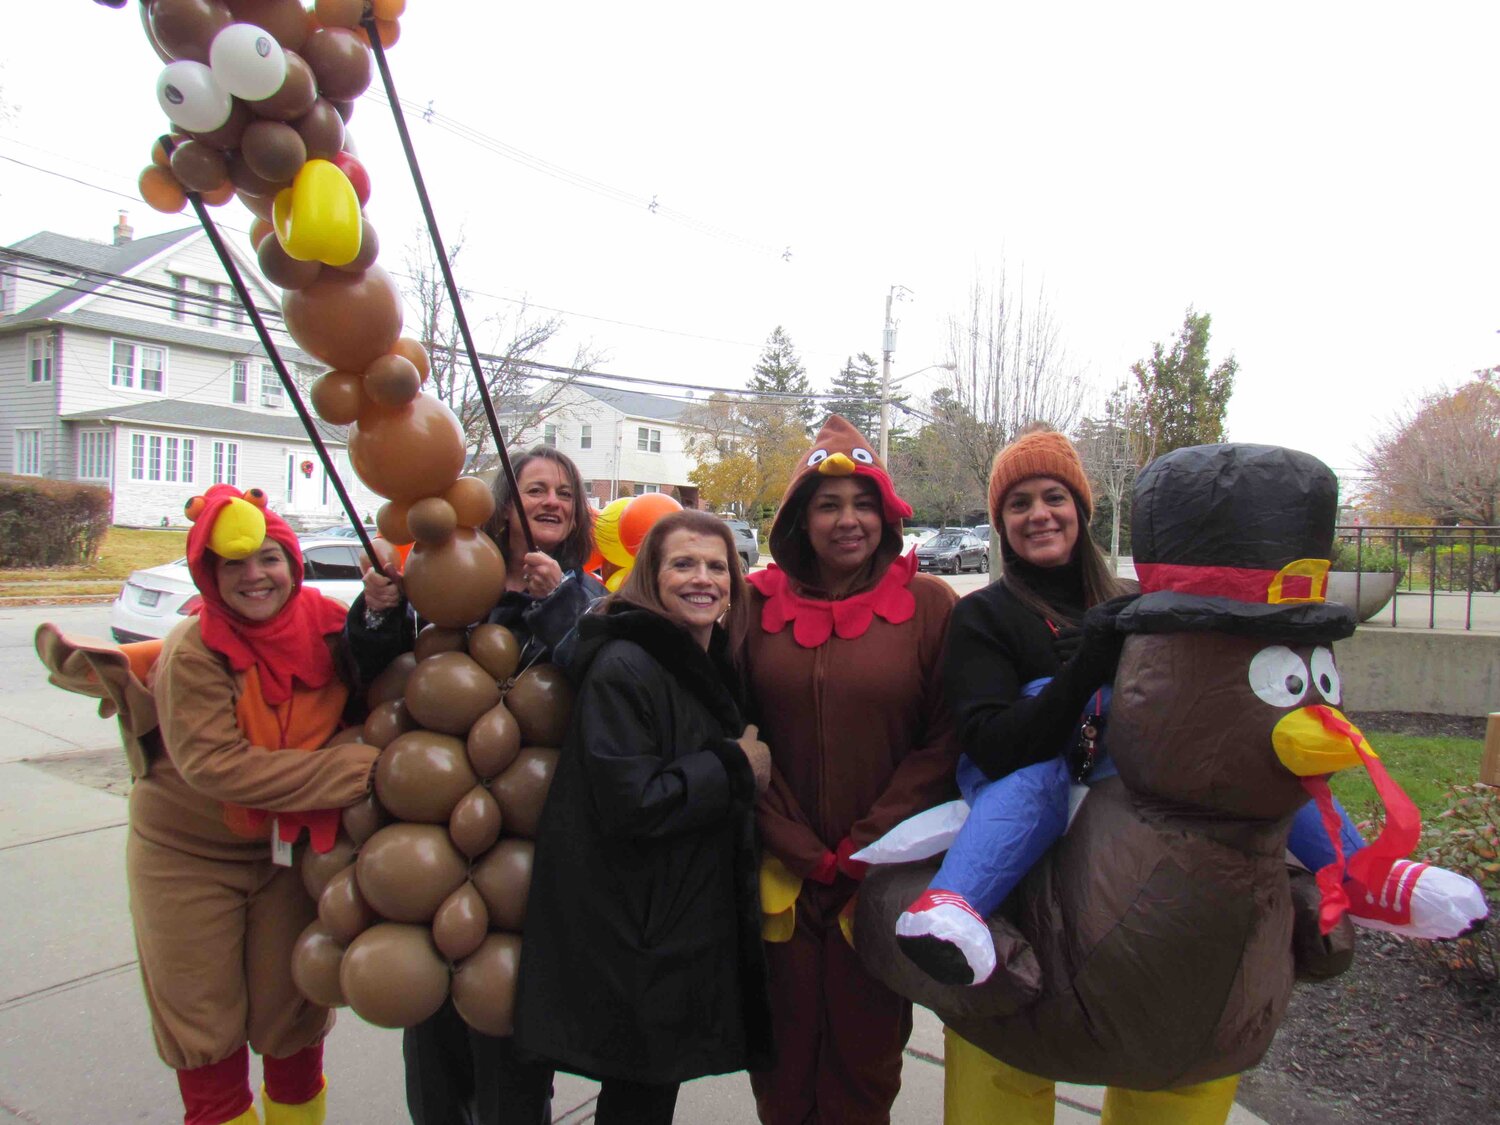 Archer Street School Principal Paula Lein and staff kicked off this year’s annual Thanksgiving Turkey Trot fundraiser.